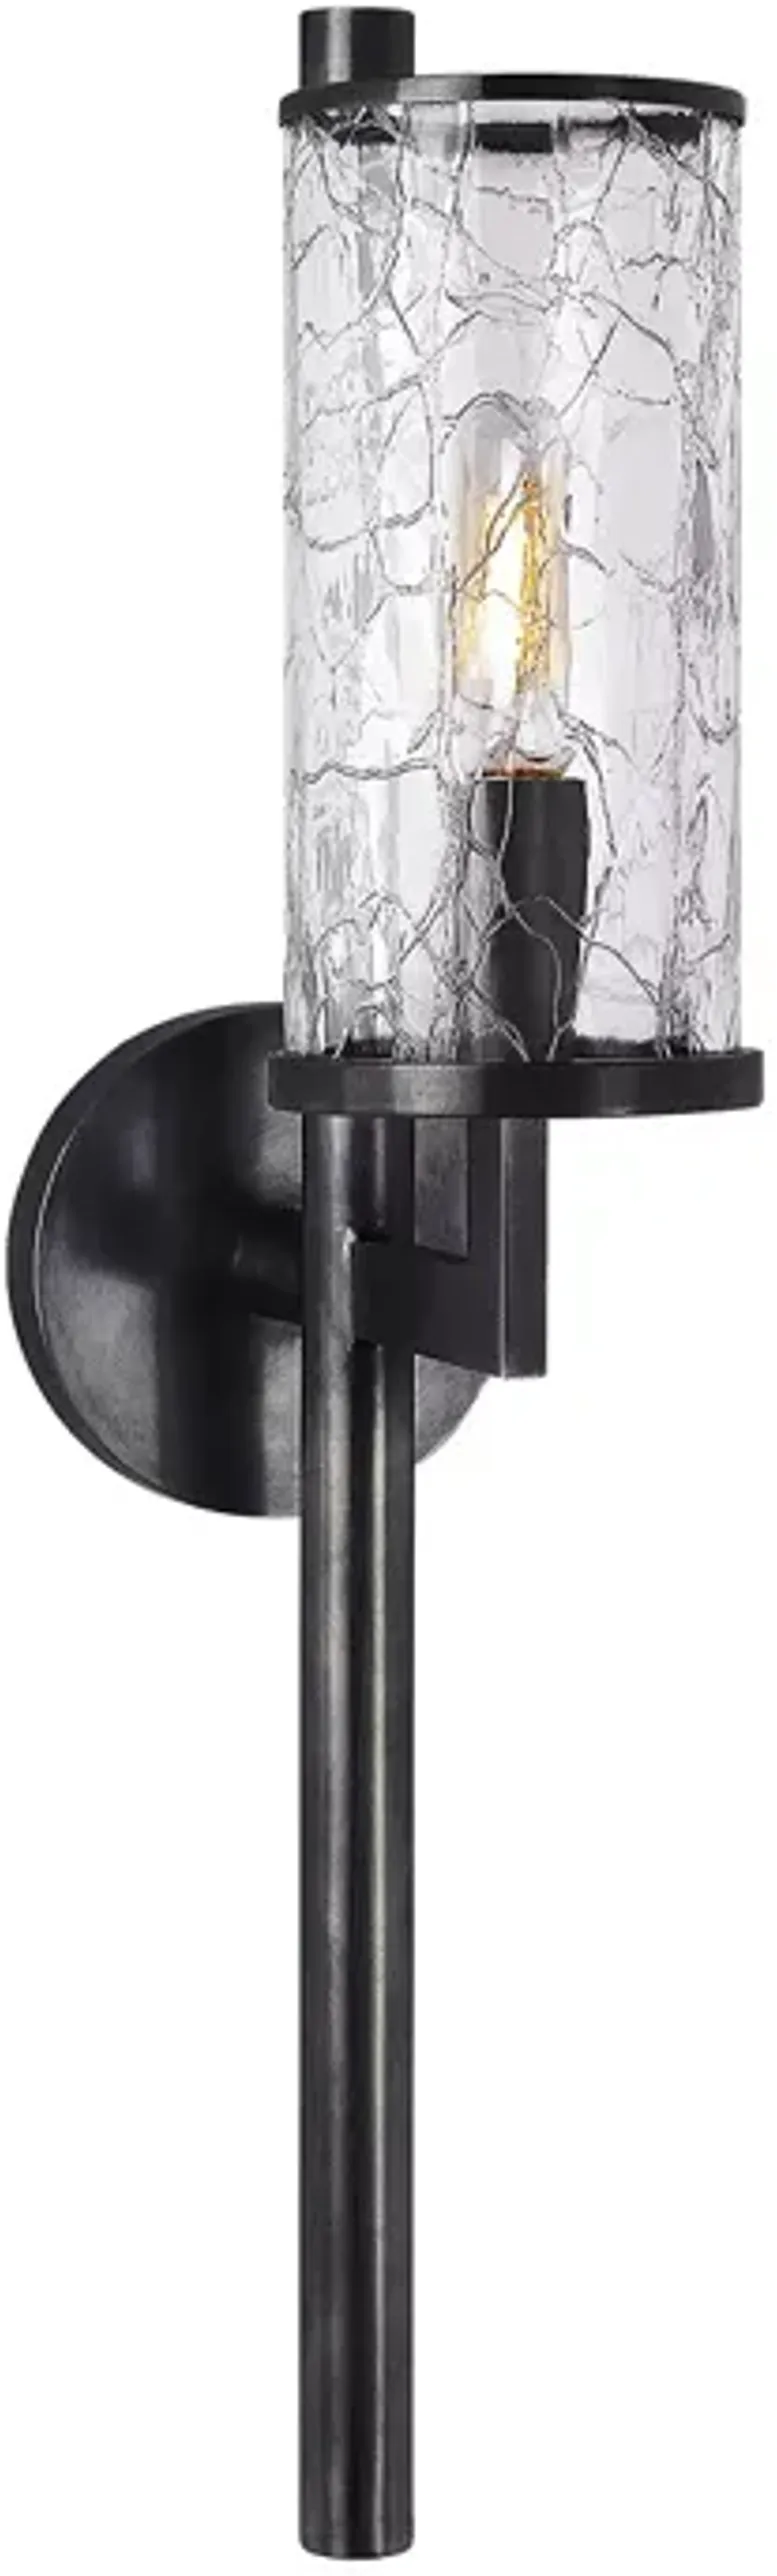 Kelly Wearstler Liaison Single Sconce with Crackle Glass Shade